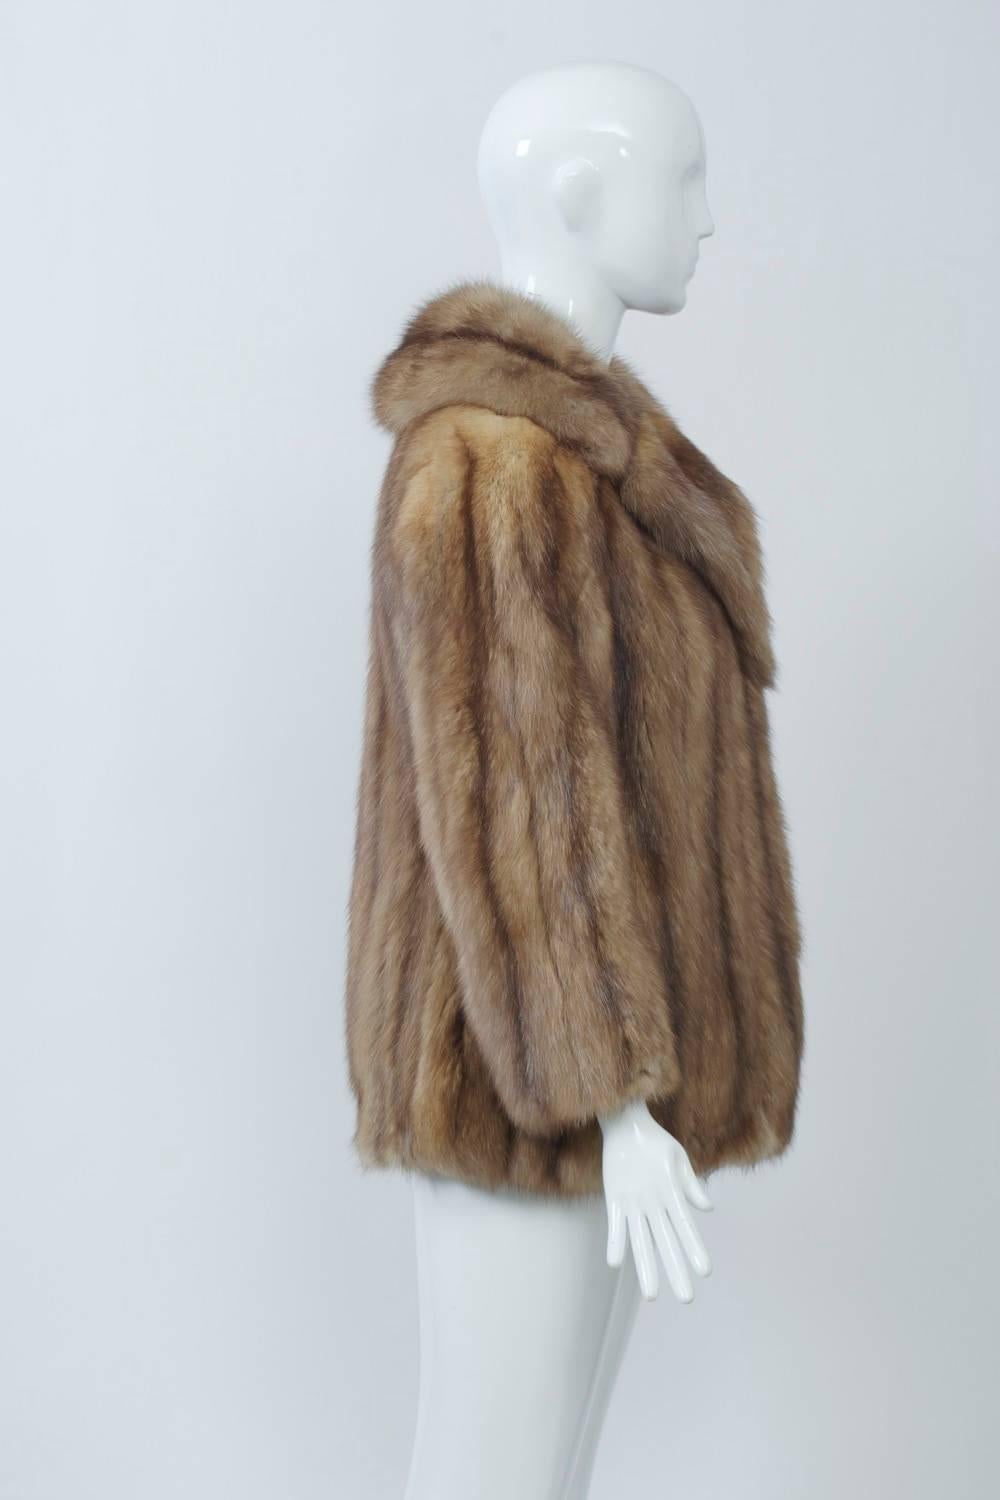 Sable jacket of high-quality skins marked by silver tips and a rich medium color from the fur department at Bergdorf Goodman. Trim profile in blazer style with notched collar and slight shaping at waist. Fur-hook closure at front edge. Small size. A